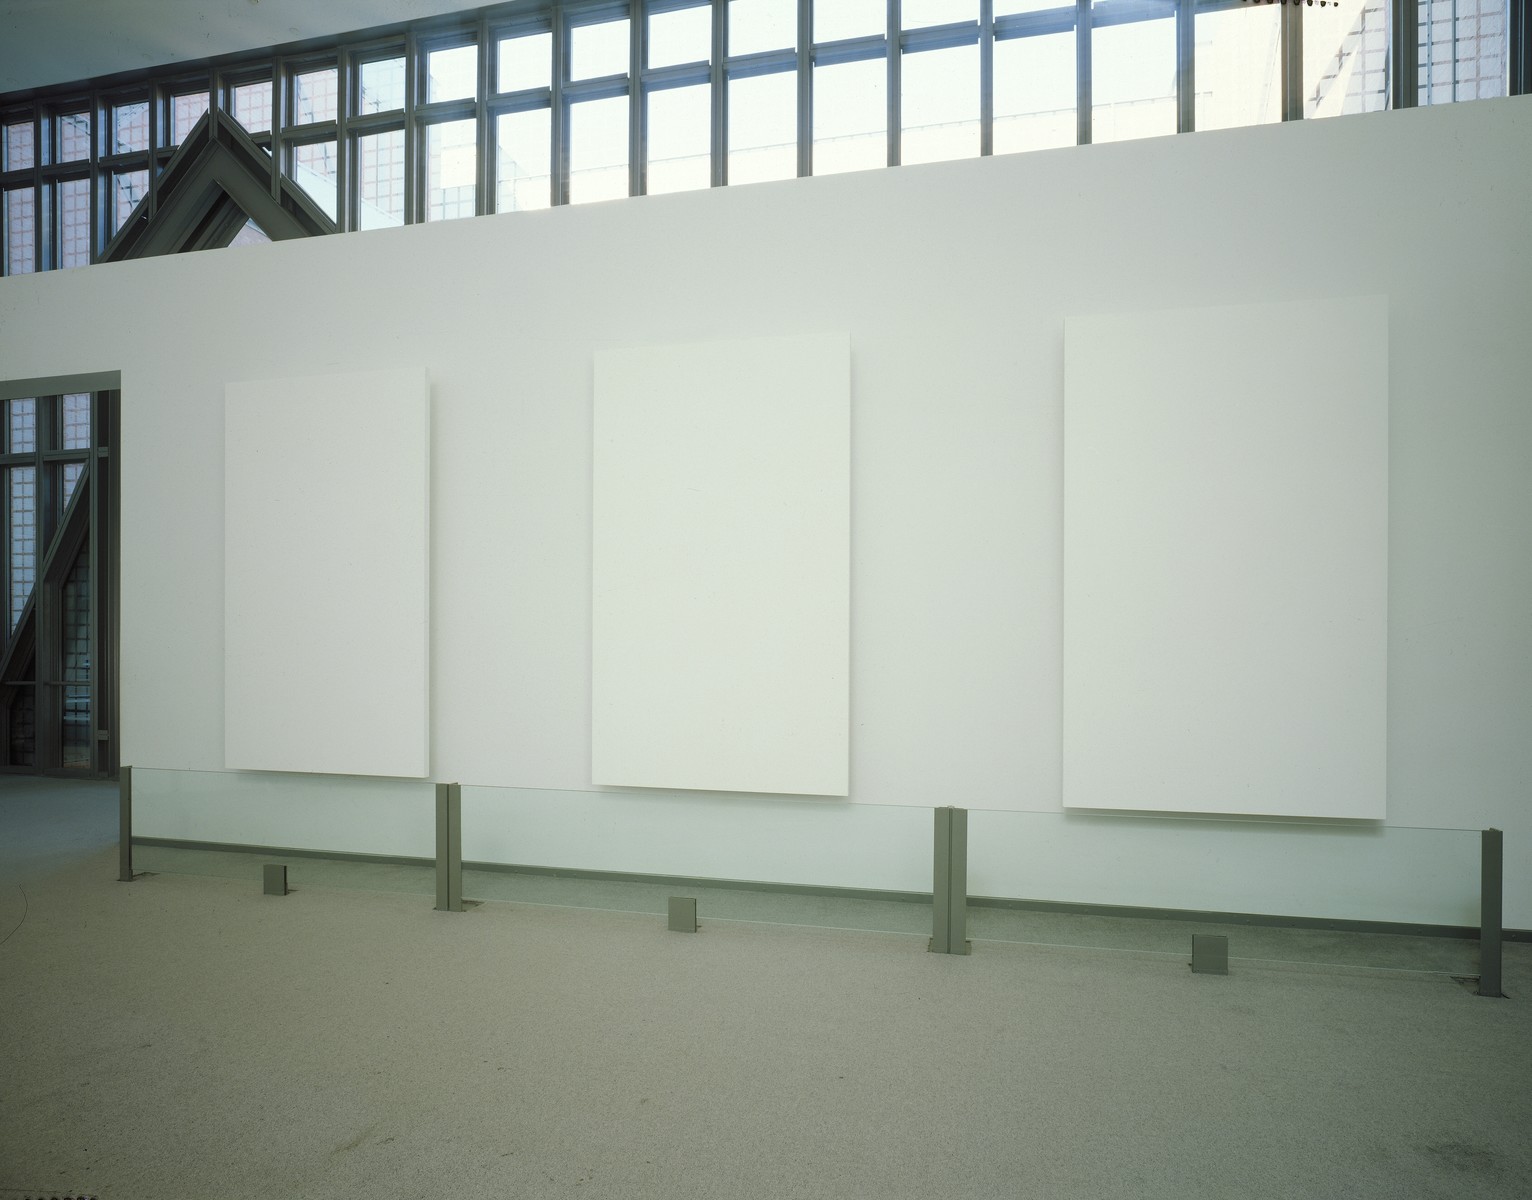 A wall sculpture entitled "Memorial" by Ellsworth Kelly, displayed in the permanent exhibition of the U.S. Holocaust Memorial Museum in the lounge space between the third and fourth floors. These three paintings along with a fourth comprise the entire work.